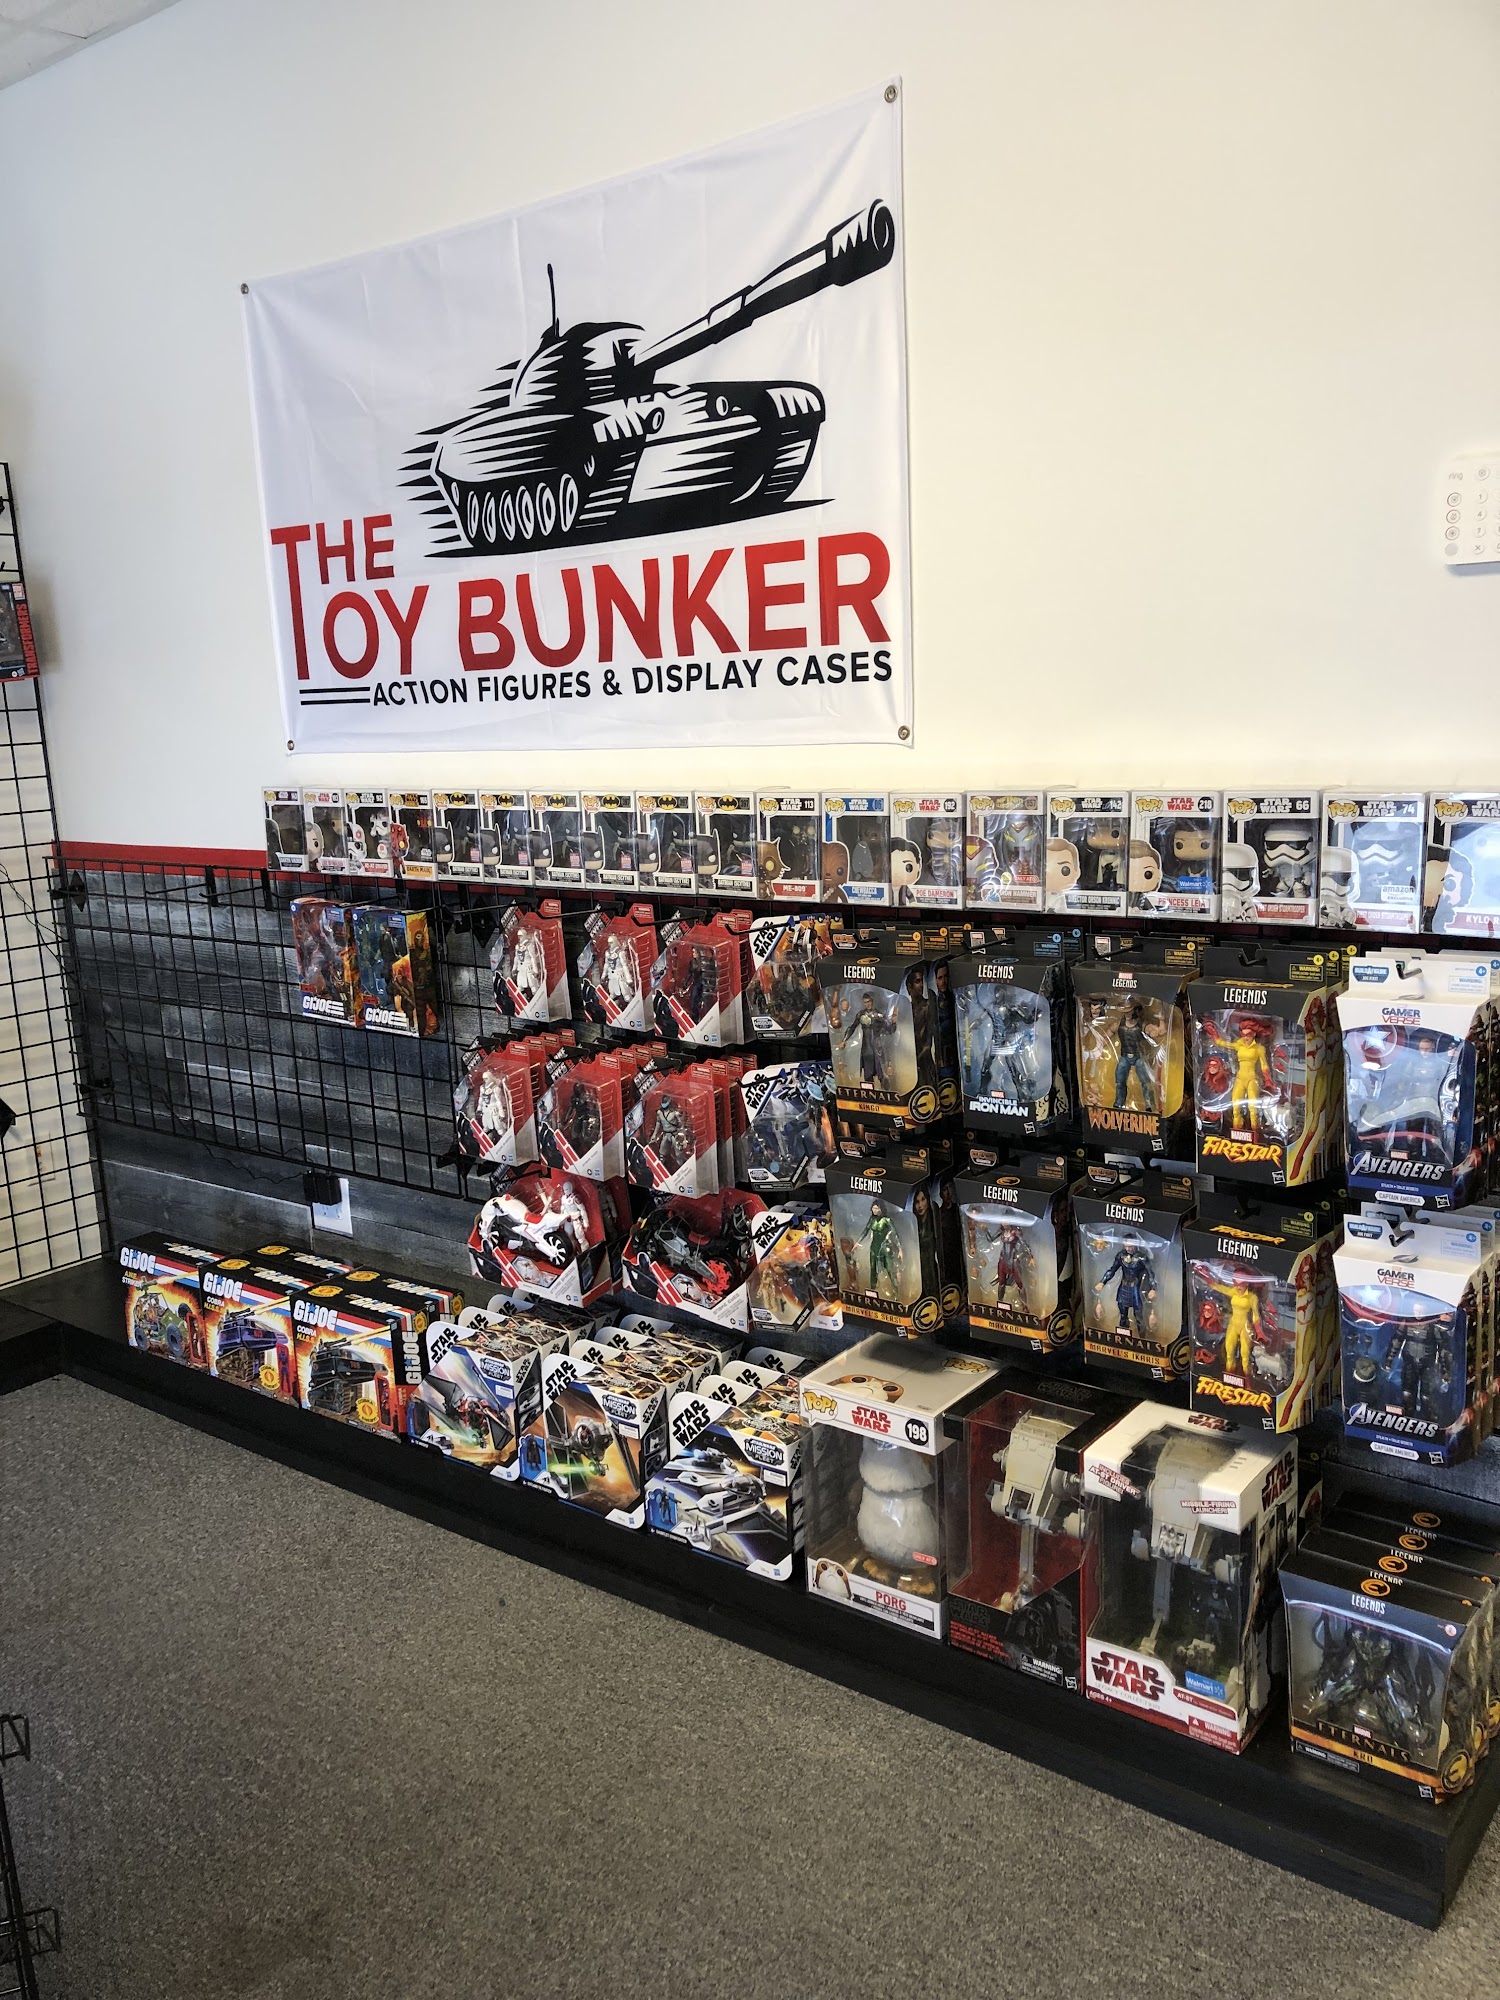 The Toy Bunker